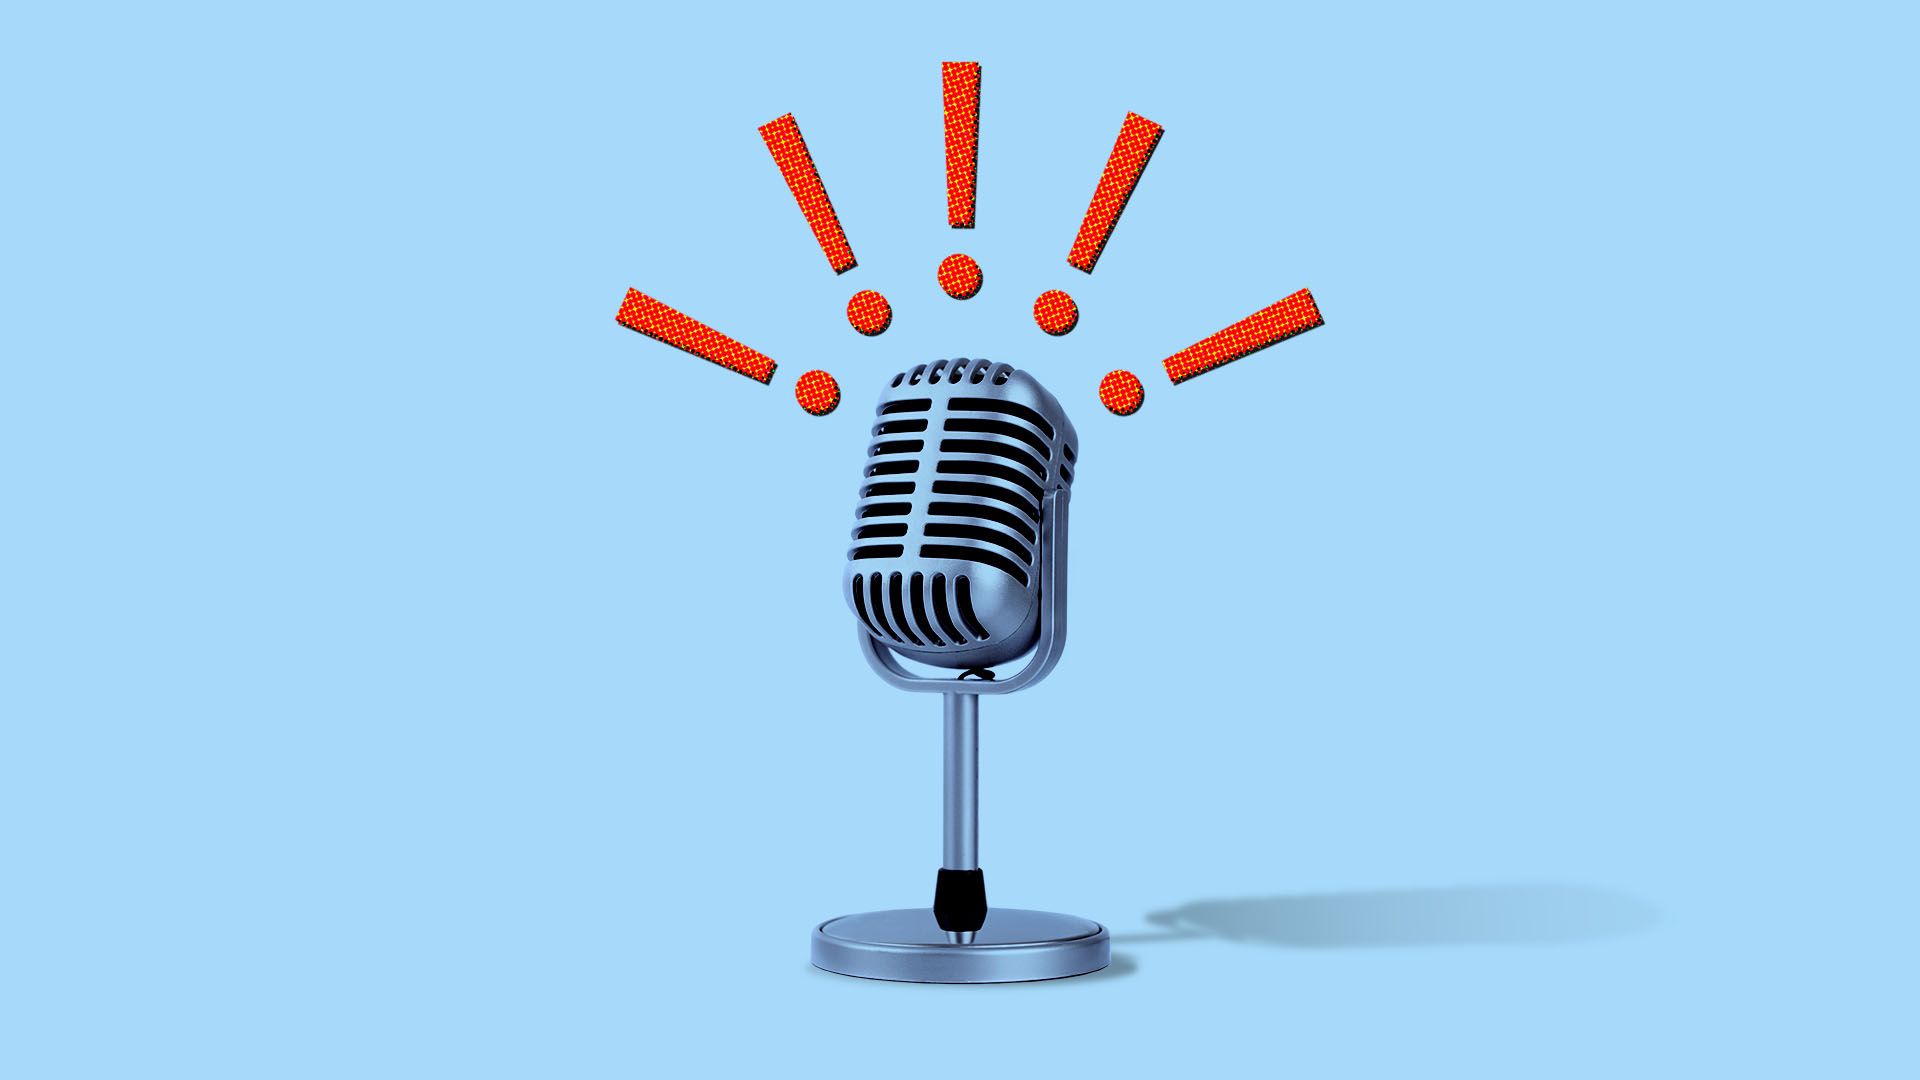 Illustration of a microphone surrounded by exclamation points